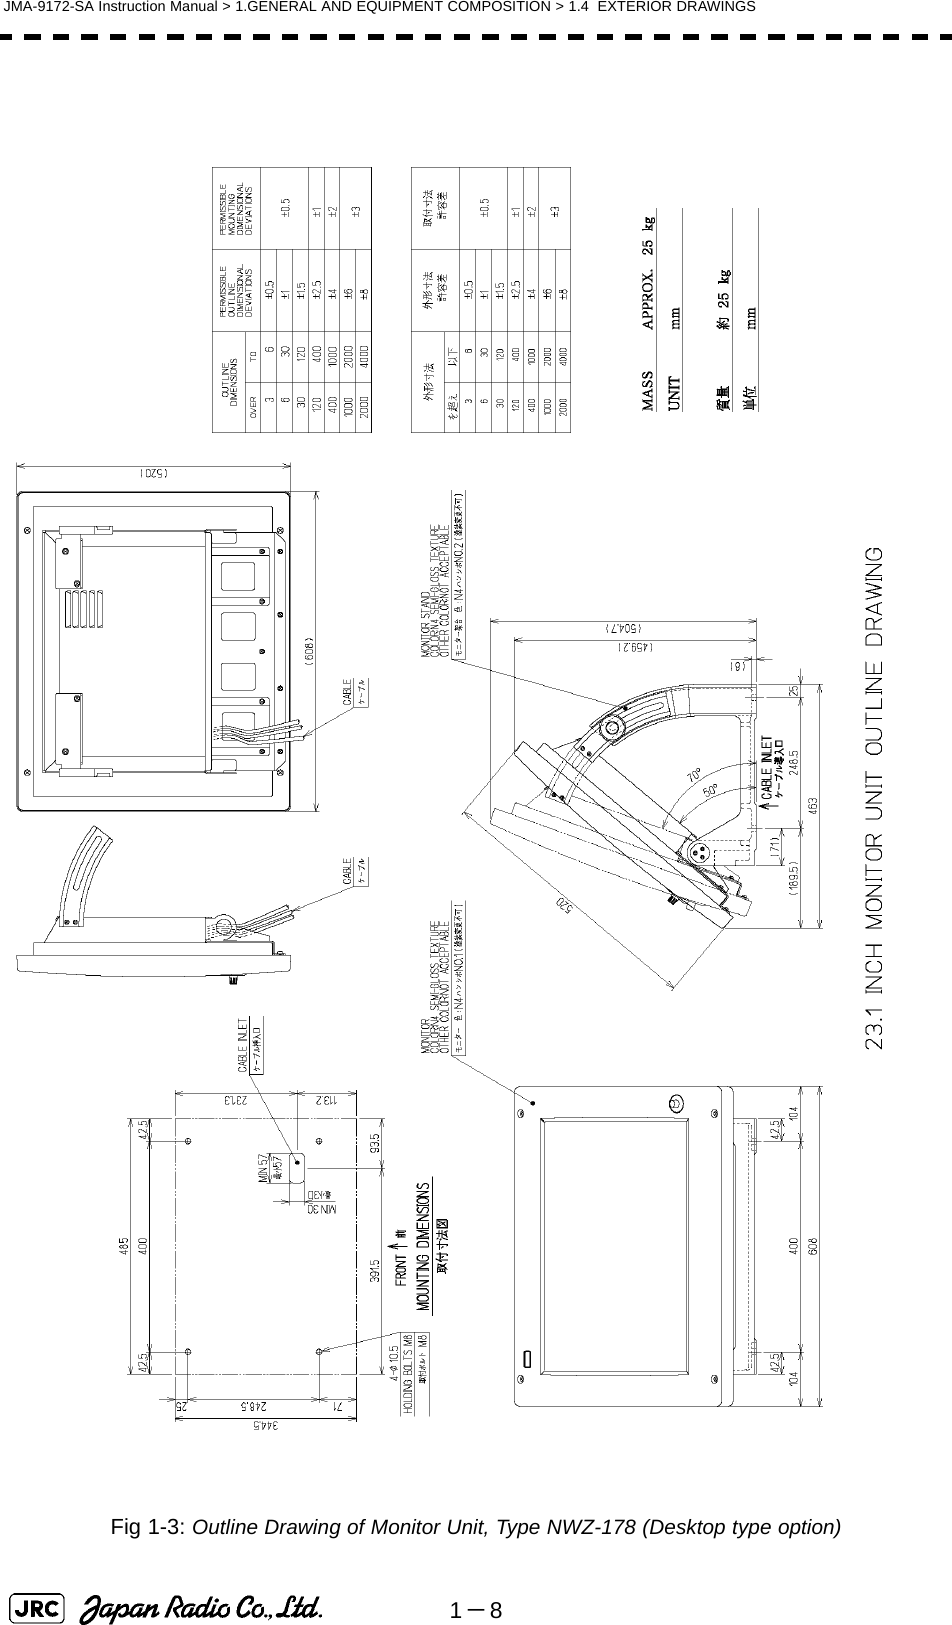 1－8JMA-9172-SA Instruction Manual &gt; 1.GENERAL AND EQUIPMENT COMPOSITION &gt; 1.4  EXTERIOR DRAWINGSFig 1-3: Outline Drawing of Monitor Unit, Type NWZ-178 (Desktop type option)